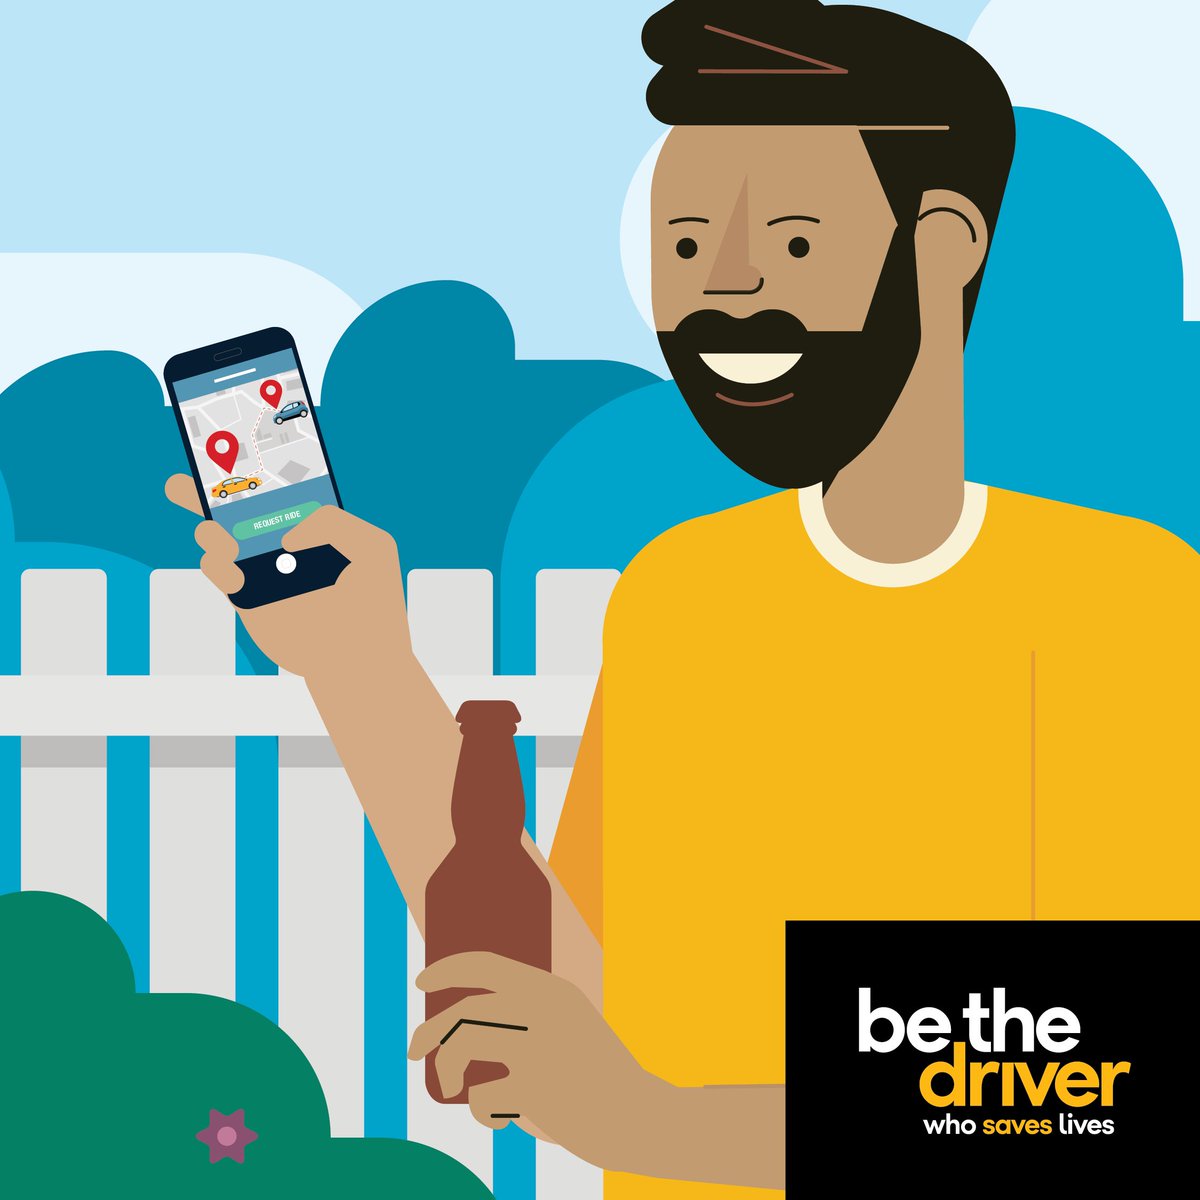 🇺🇸 This Memorial Day, #BeTheDriver who puts safety in the driver's seat. Avoid impaired driving — #MakeAPlan via rideshare or arrange another sober ride home.